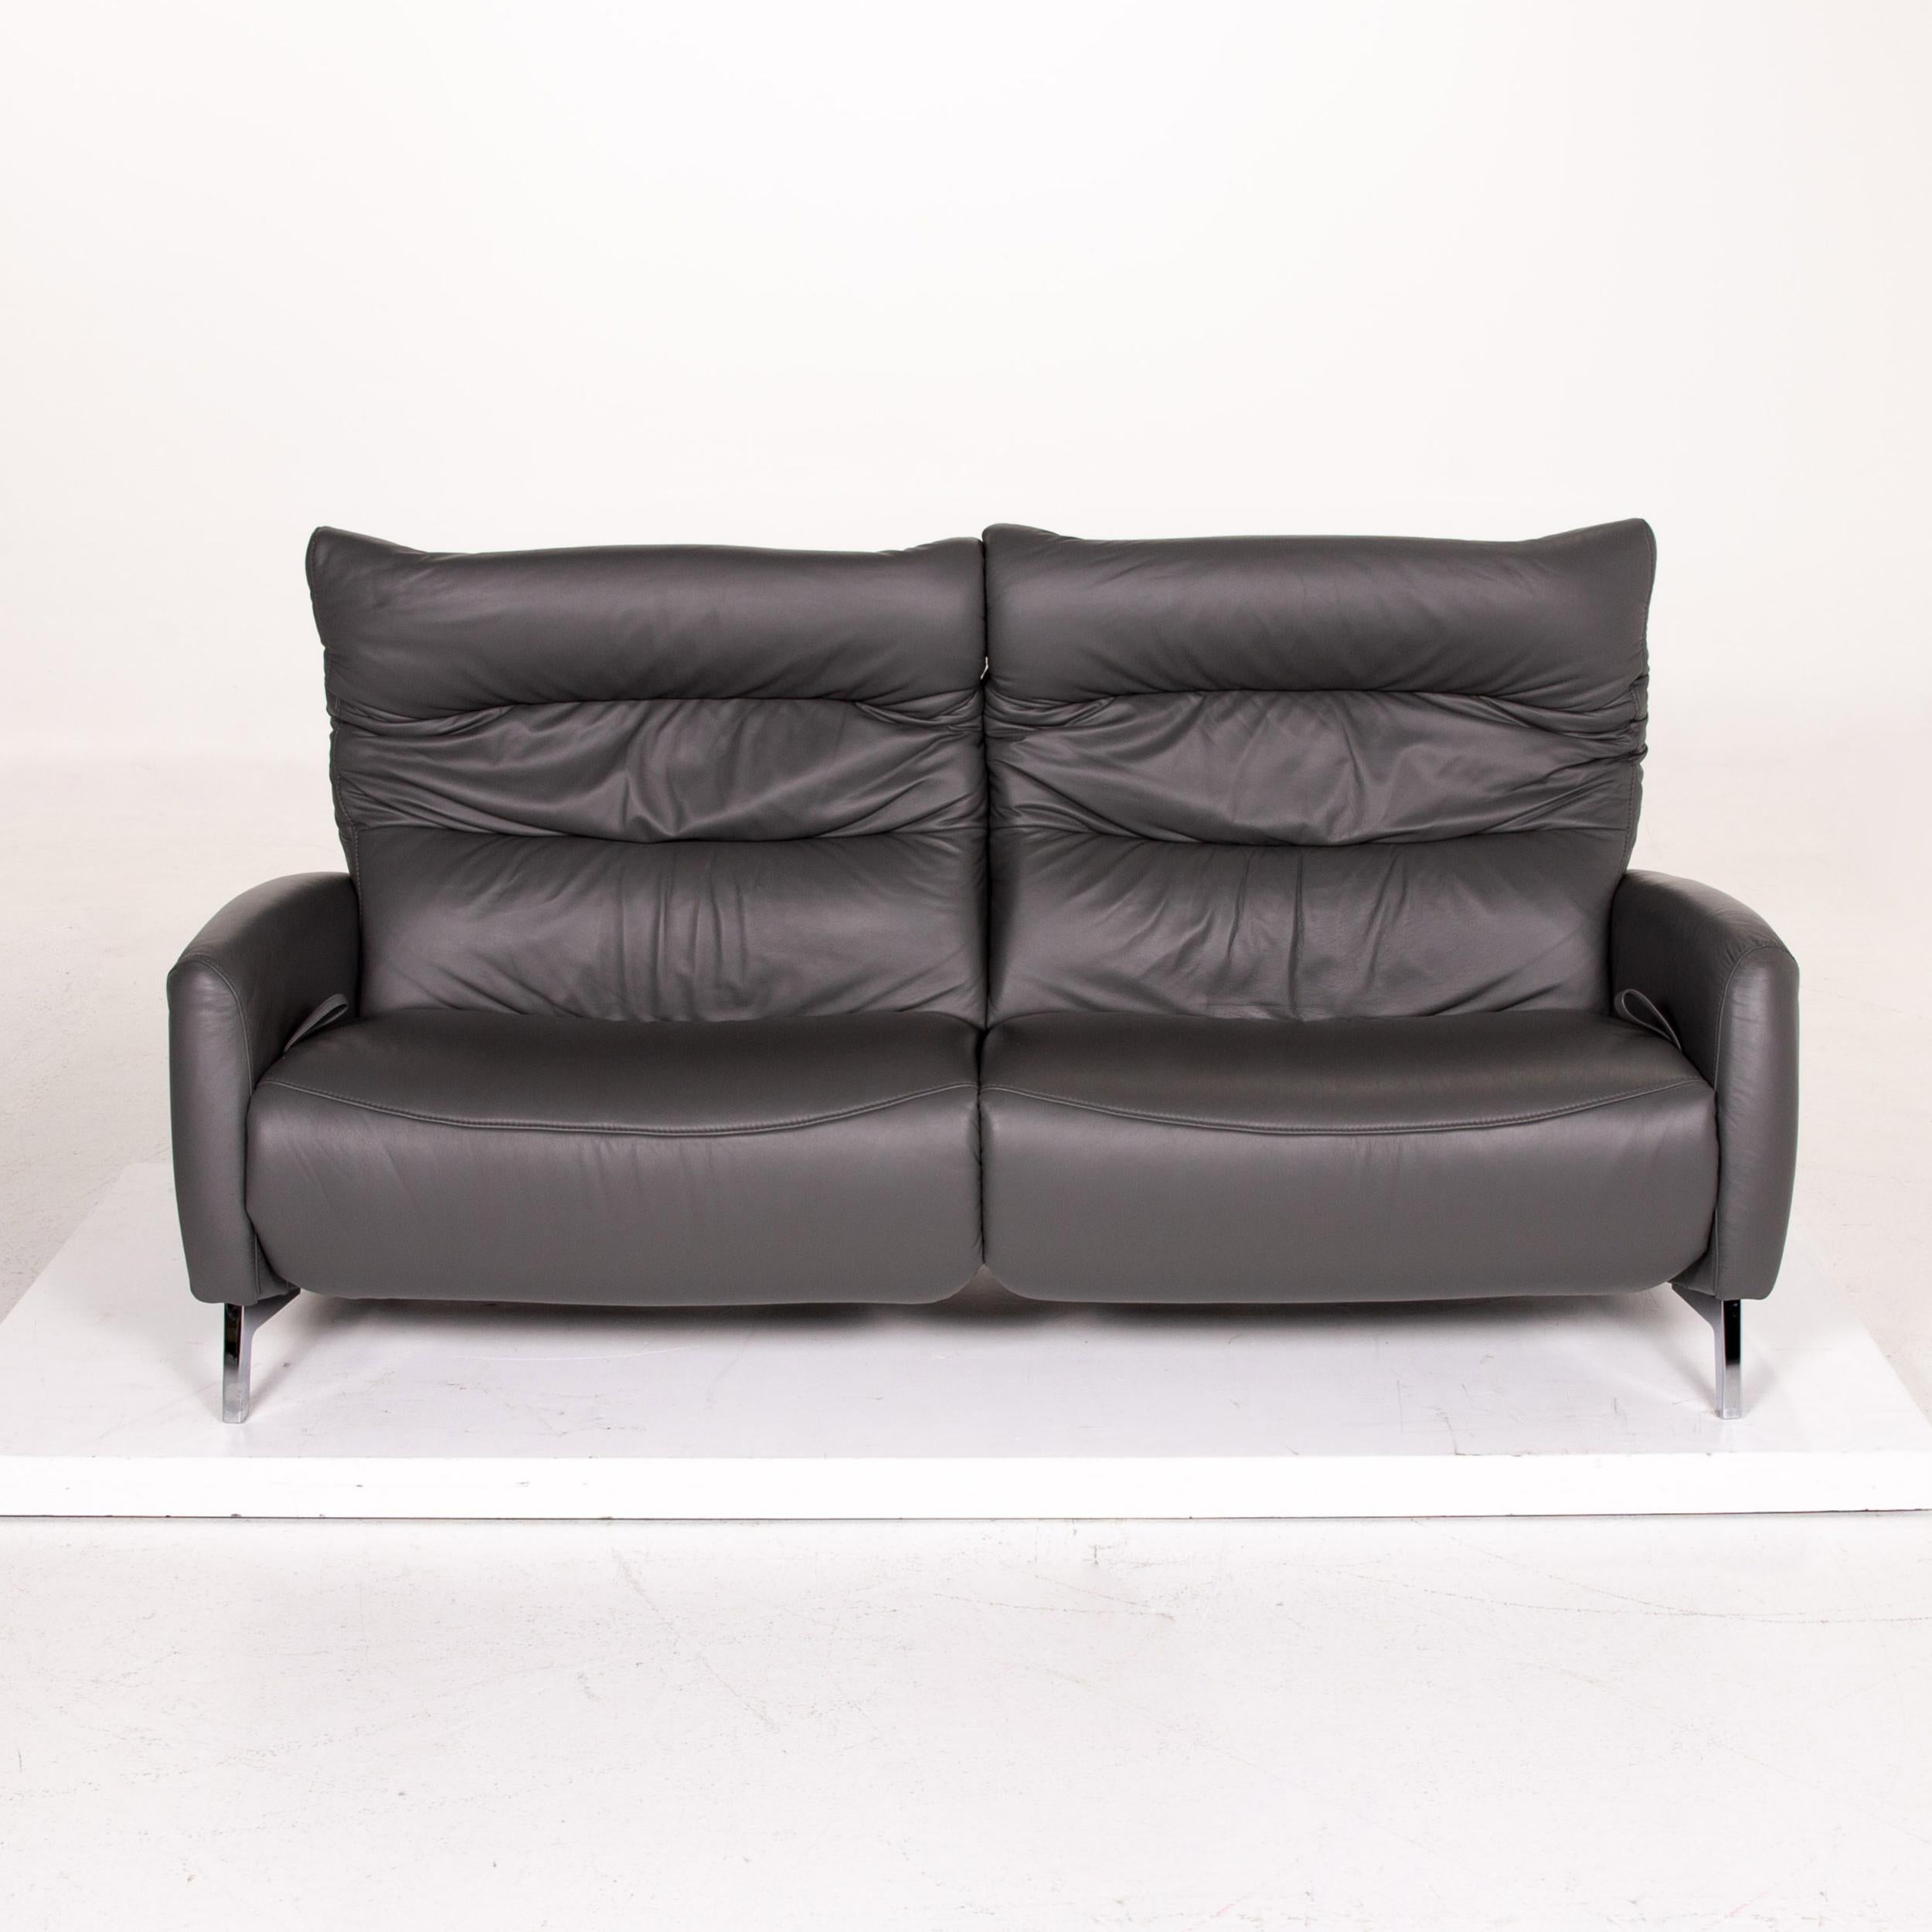 Mondo Recero Leather Sofa Gray Two-Seat Function Relax Function Couch 8